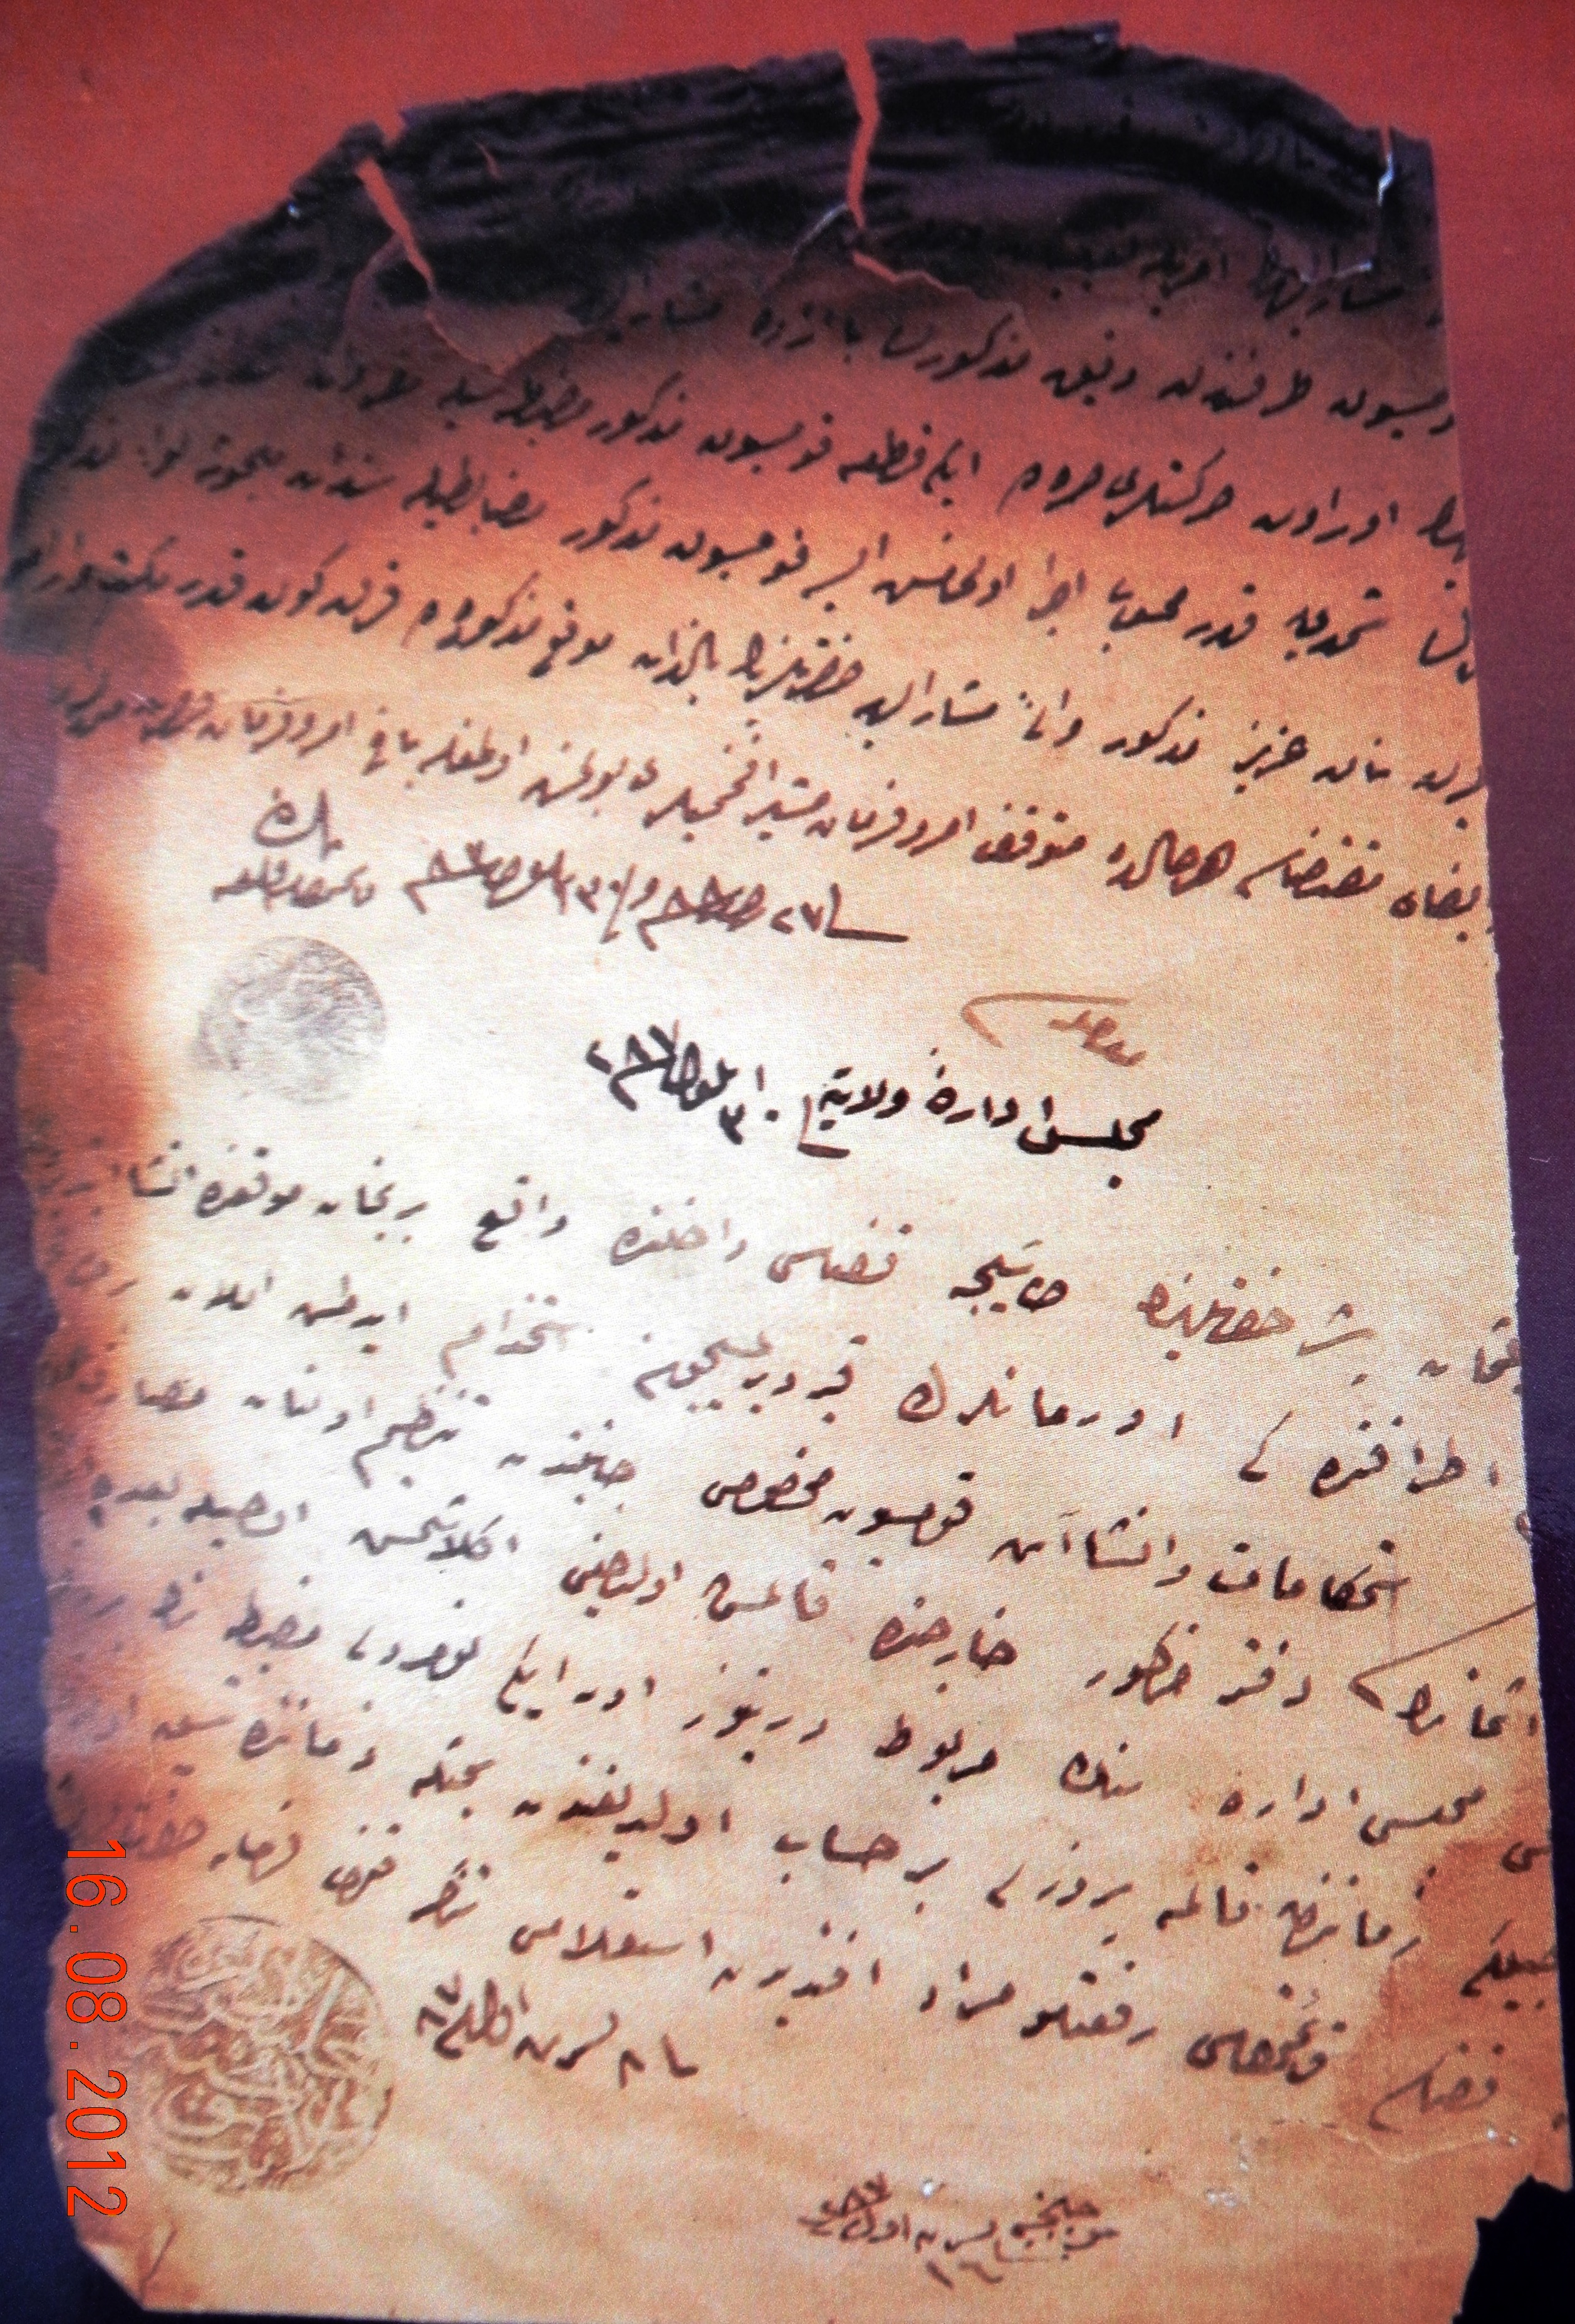 One of the documents salvaged from the Institute of Oriental Studies